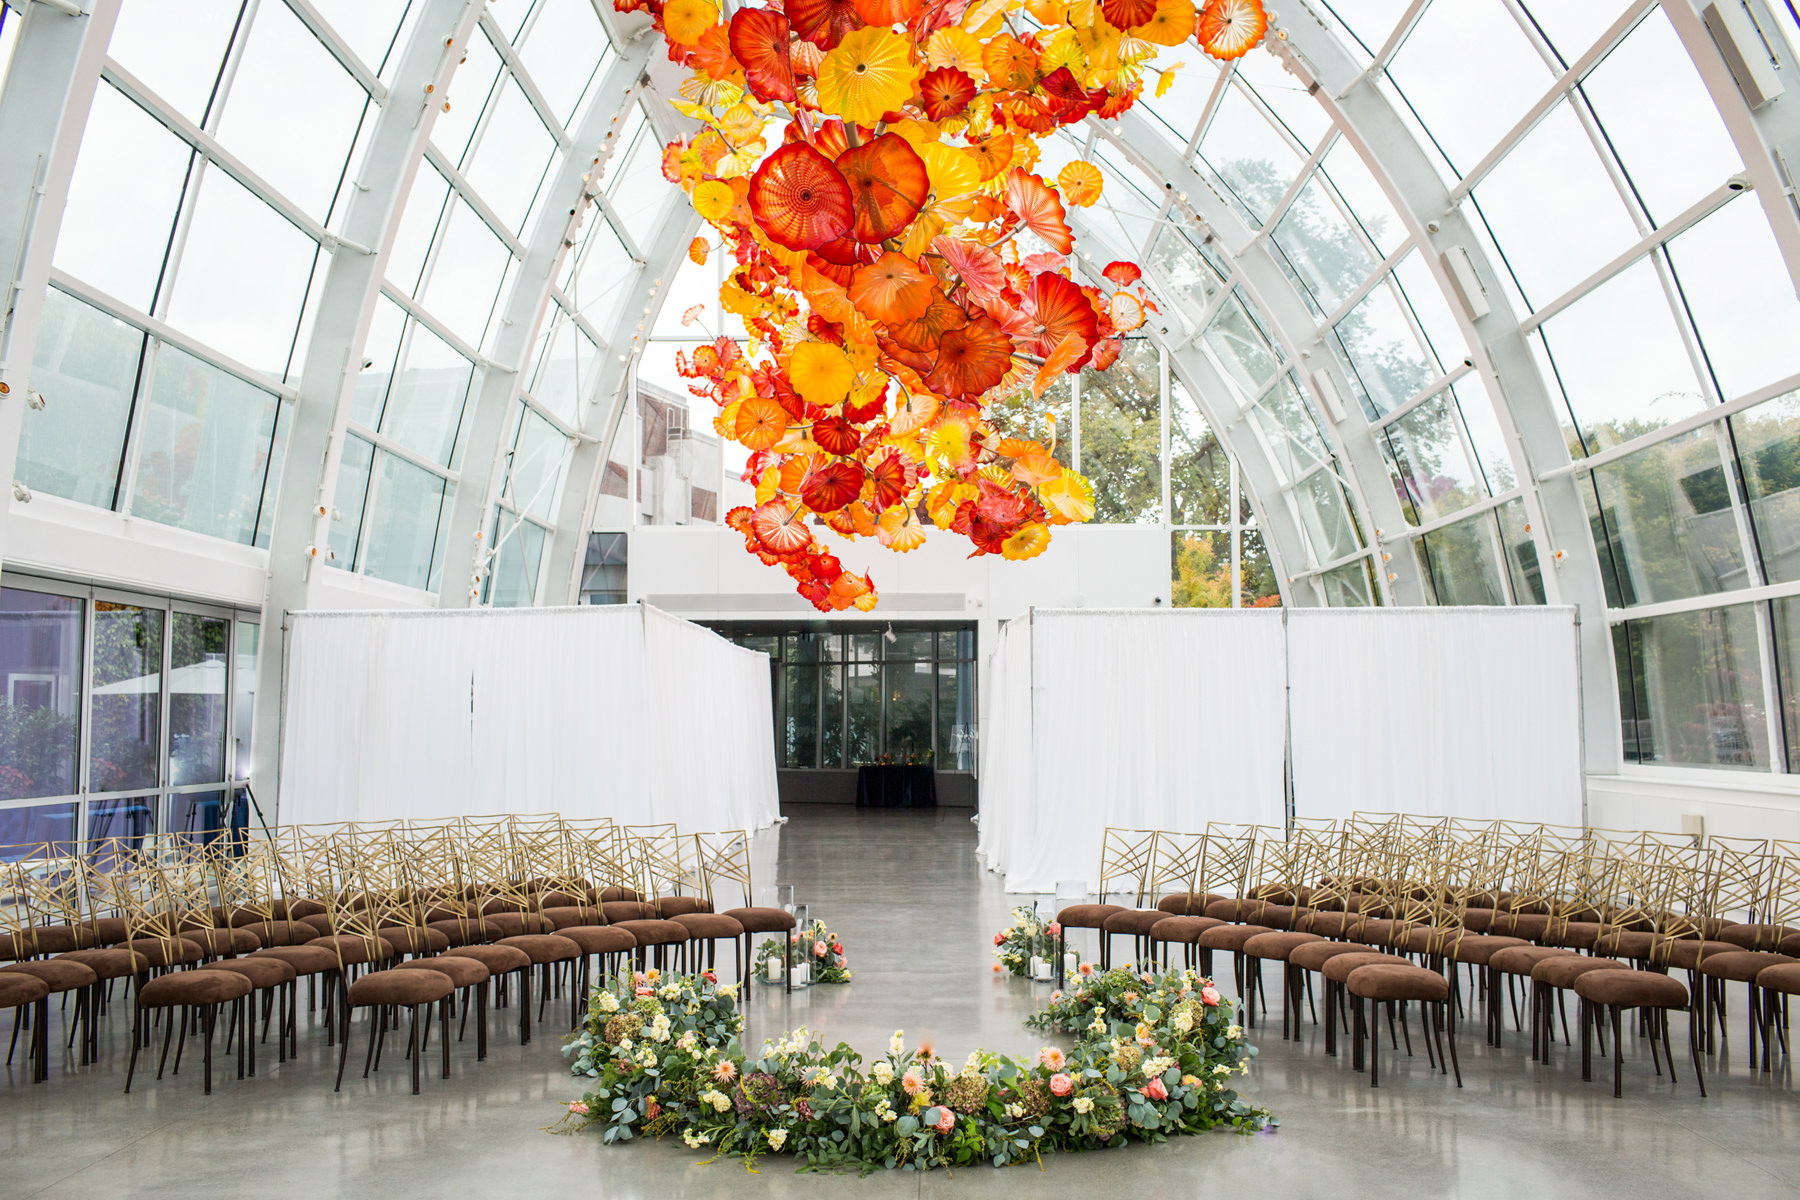 Chihuly Garden and Glass Wedding Photos Stunning